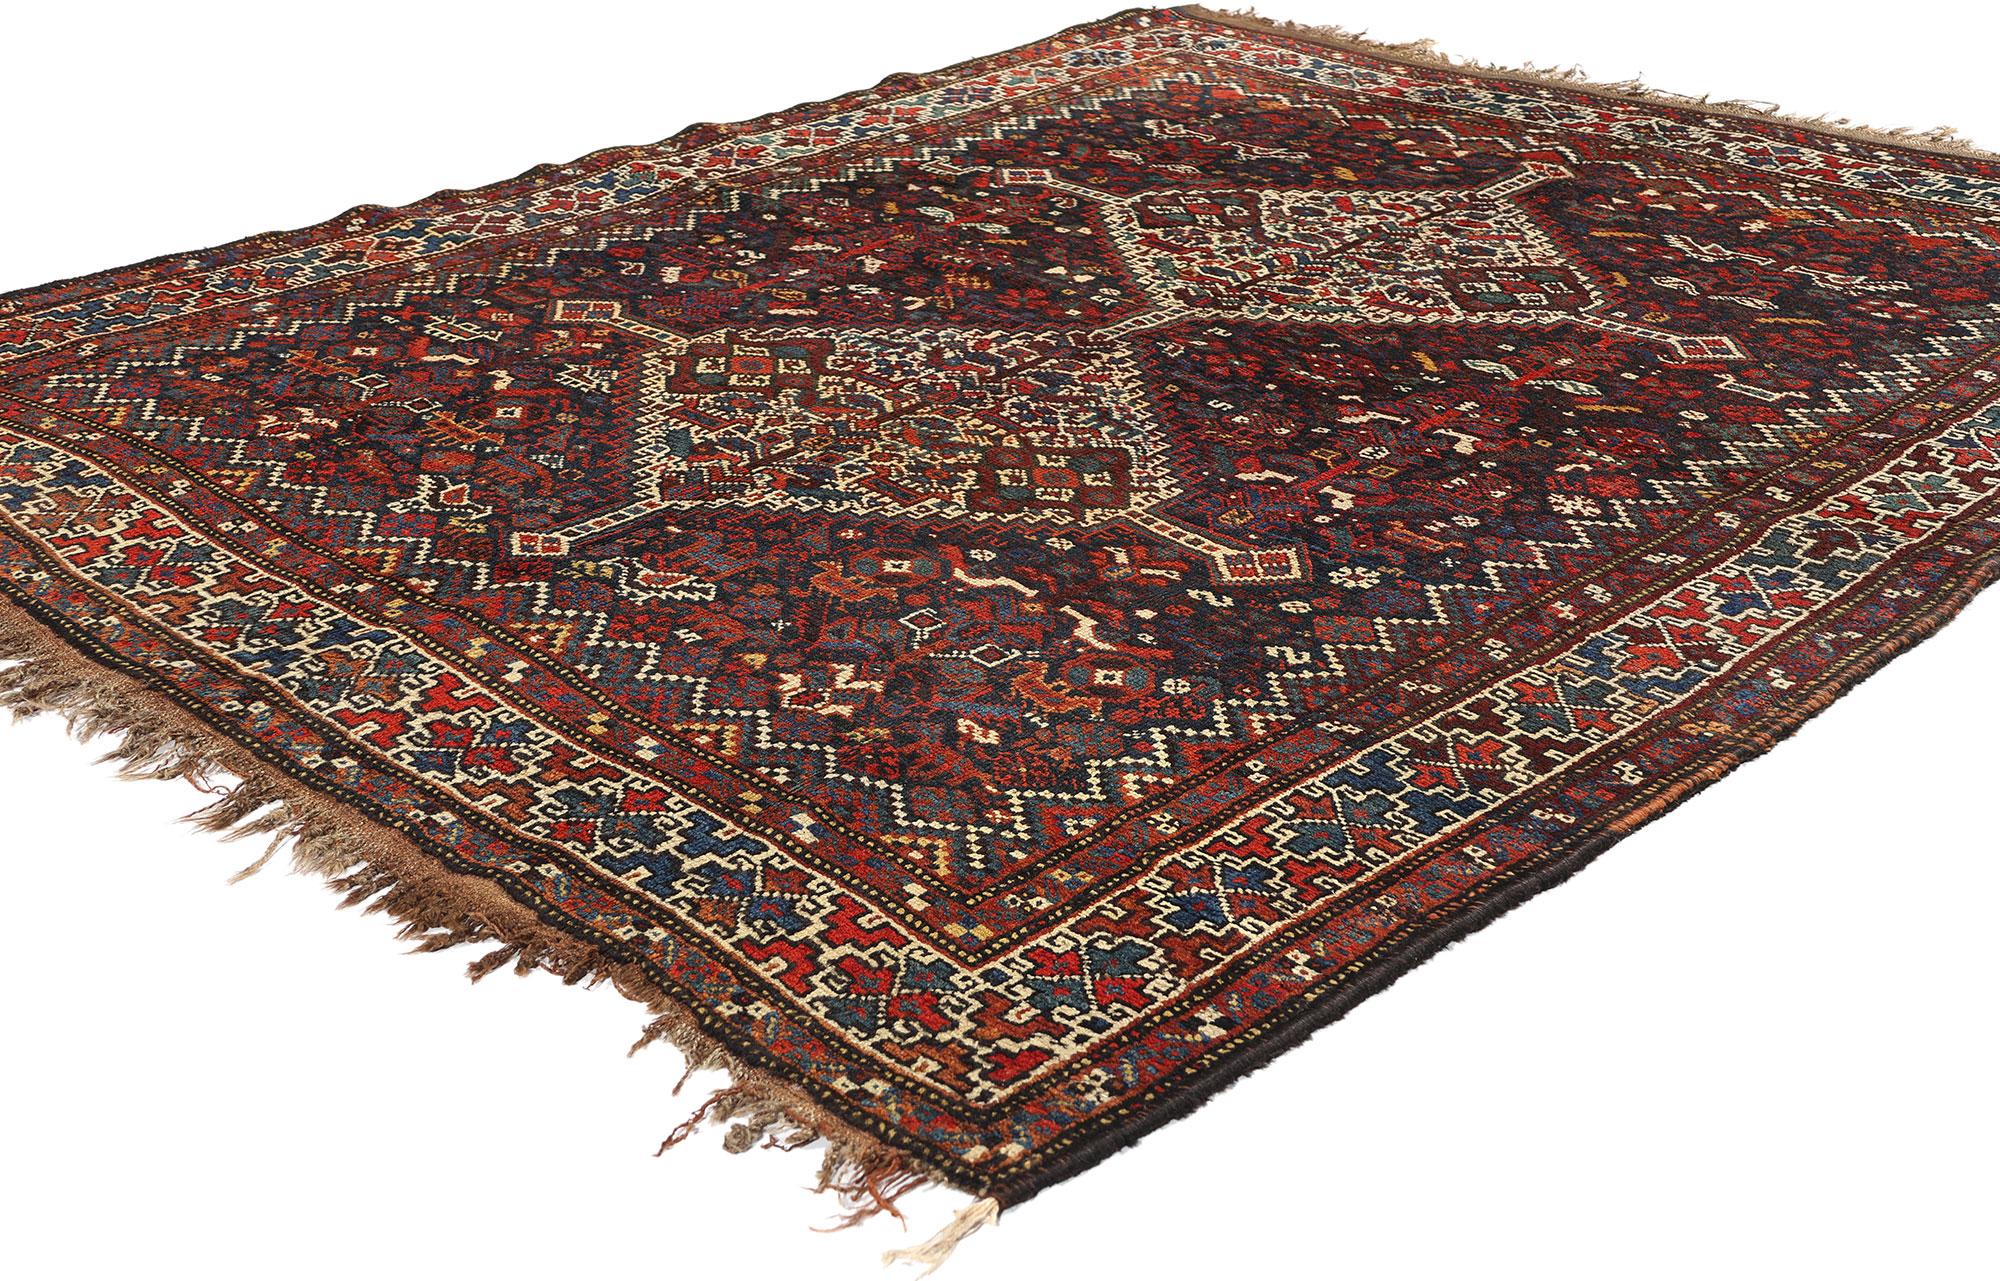 78179 Antique Persian Shiraz Rug, 05'06 x 06'07. Persian Shiraz rugs are a type of Persian rug originating from the villages around the city of Shiraz, located in Iran's Fars province. These rugs are renowned for their tribal designs and rustic